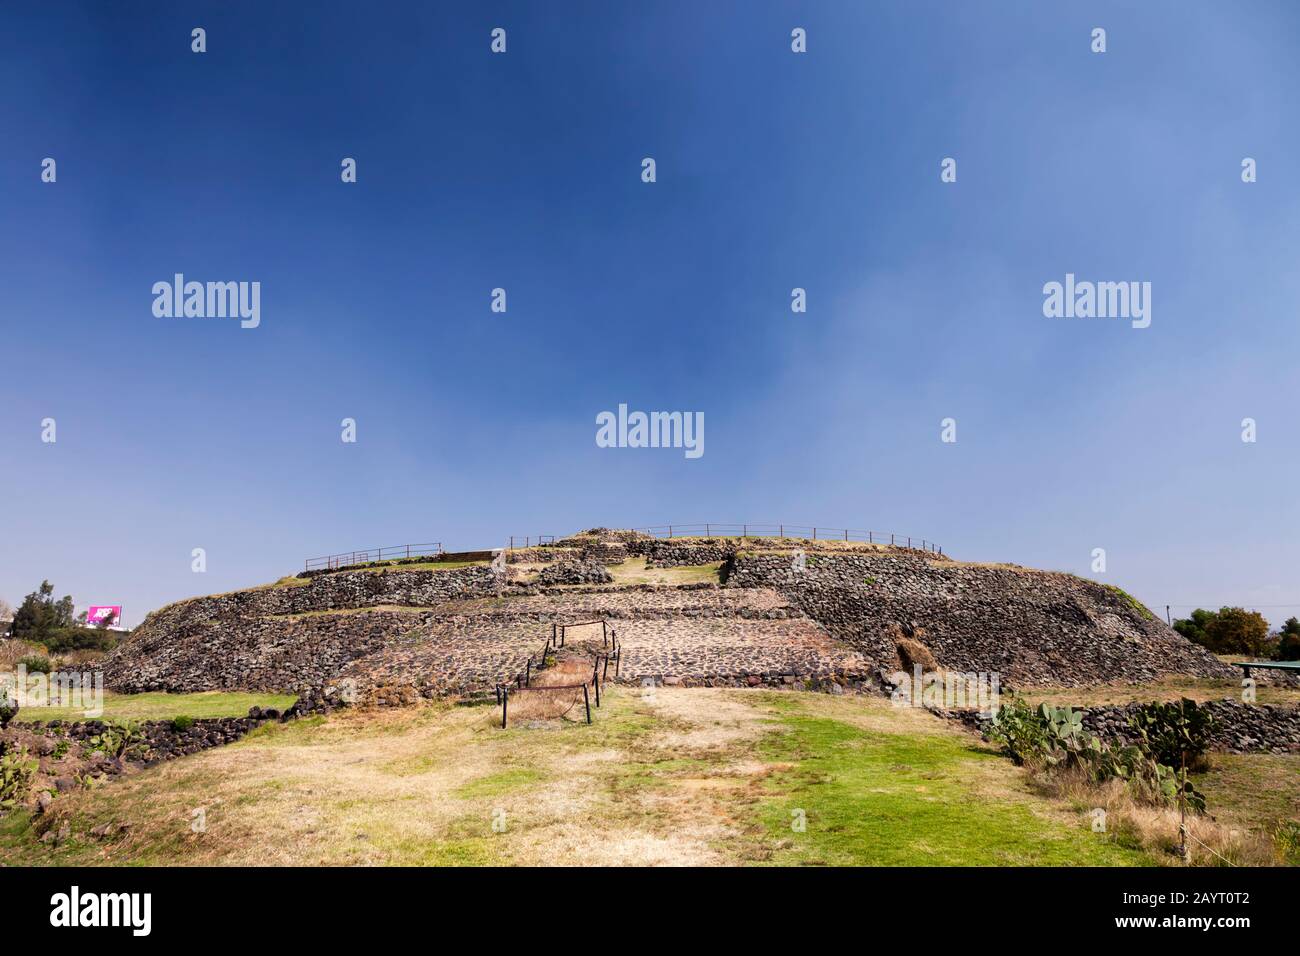 Cuicuilco, archaeological site of Mesoamerican Middle and Late Formative periods, suburb of Mexico City, Mexico, Central America Stock Photo